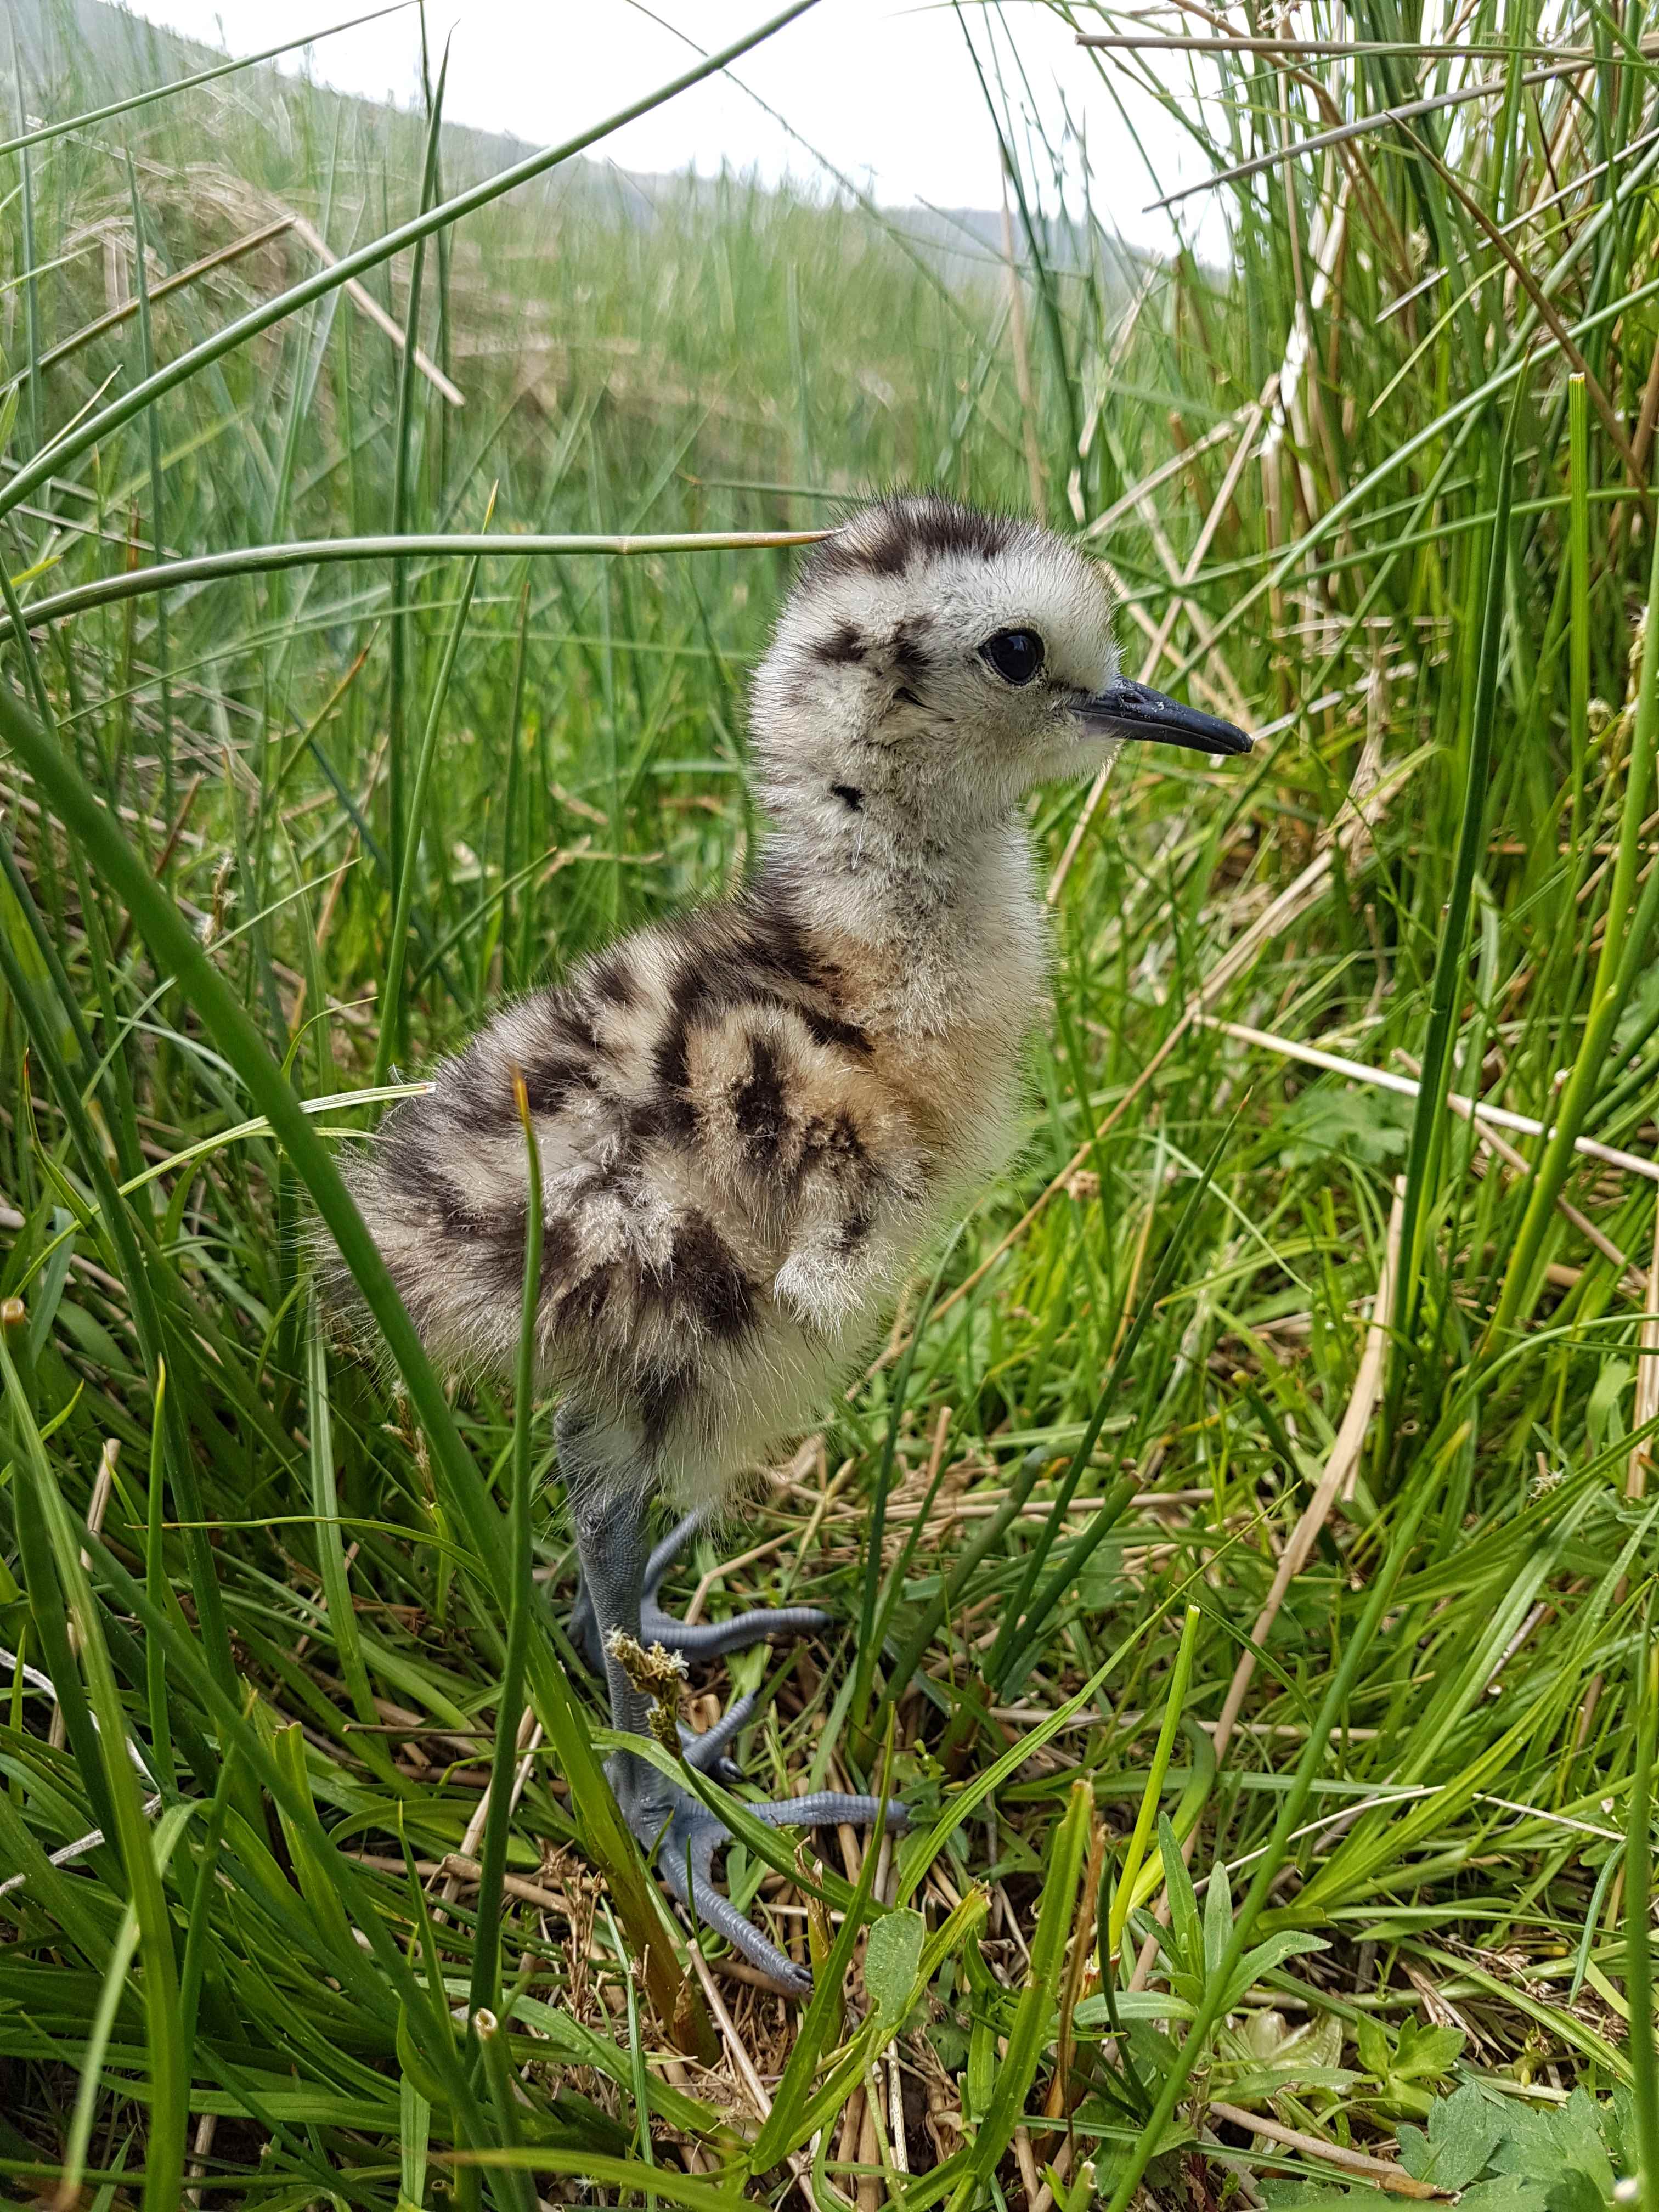 Curlew chick standing up in the grass